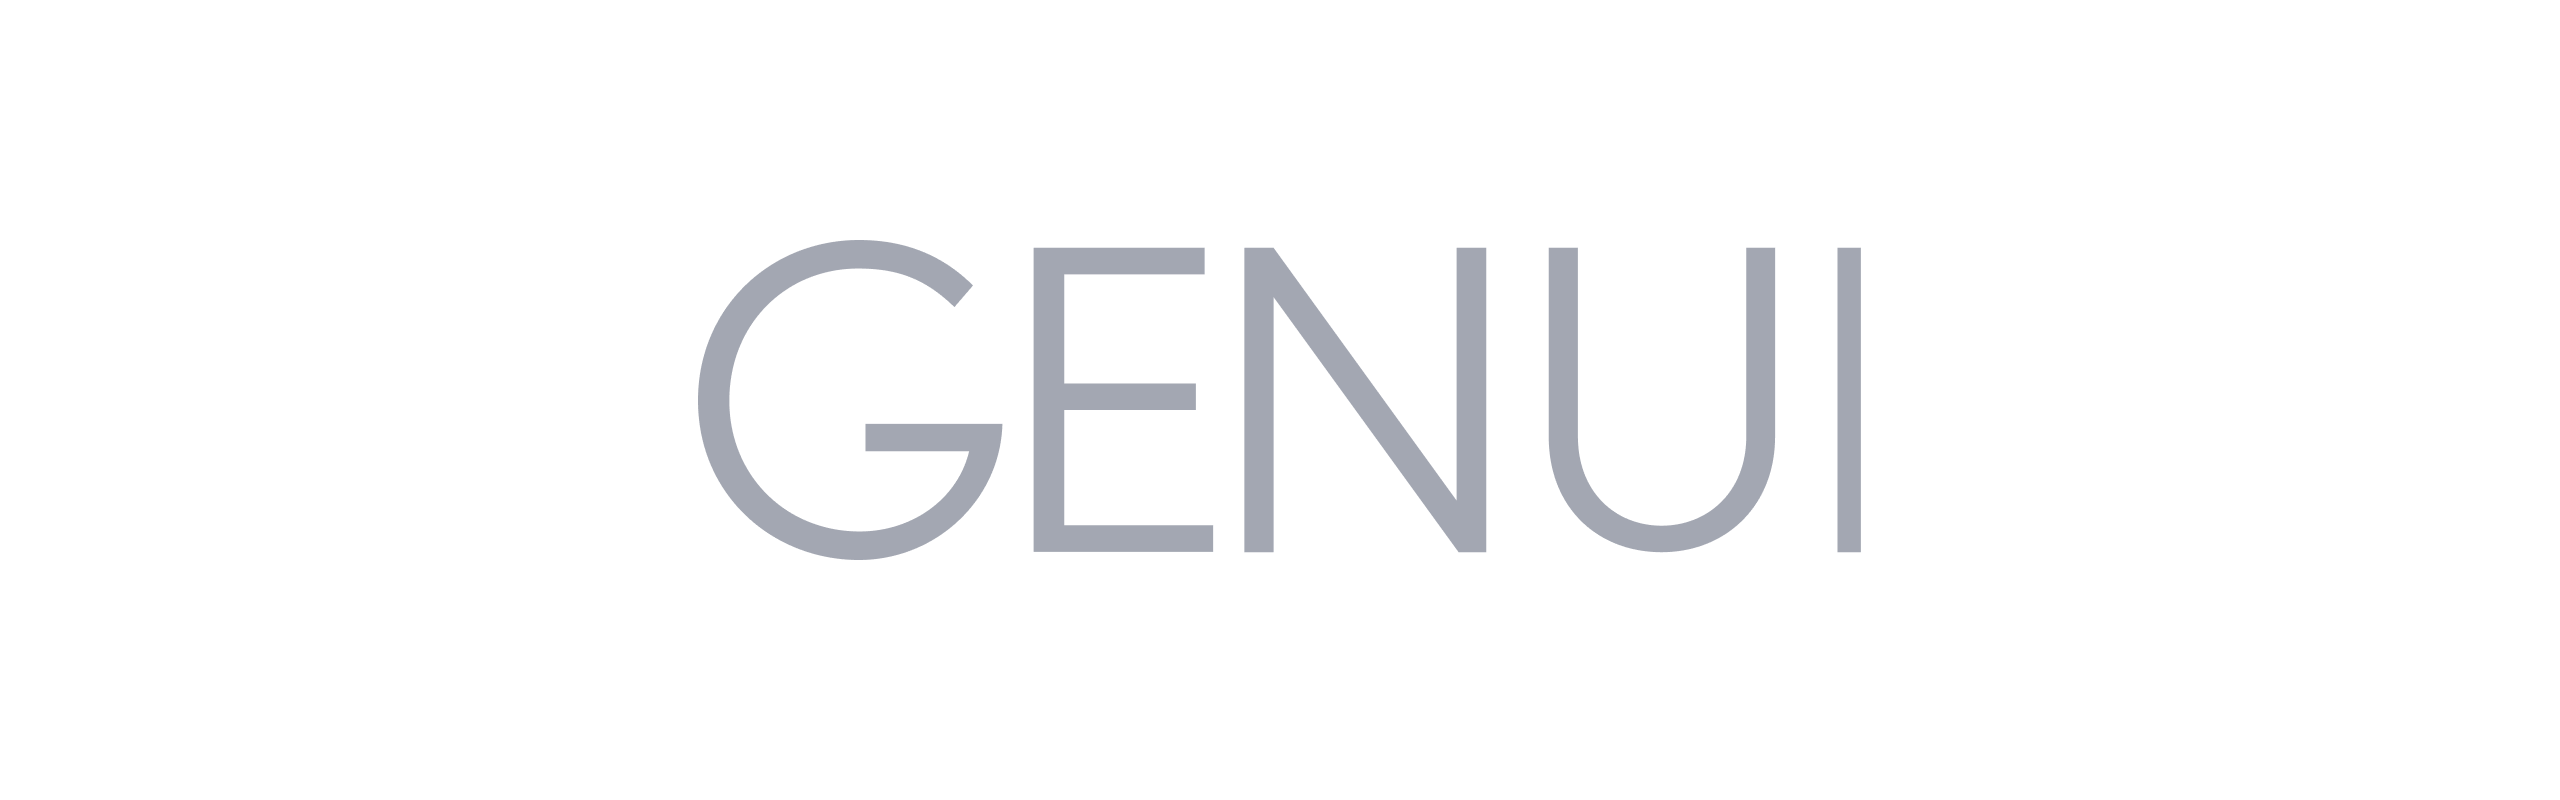 Technology & product due diligence | Code & Co. advises GENUI PARTNERS (logo shown)